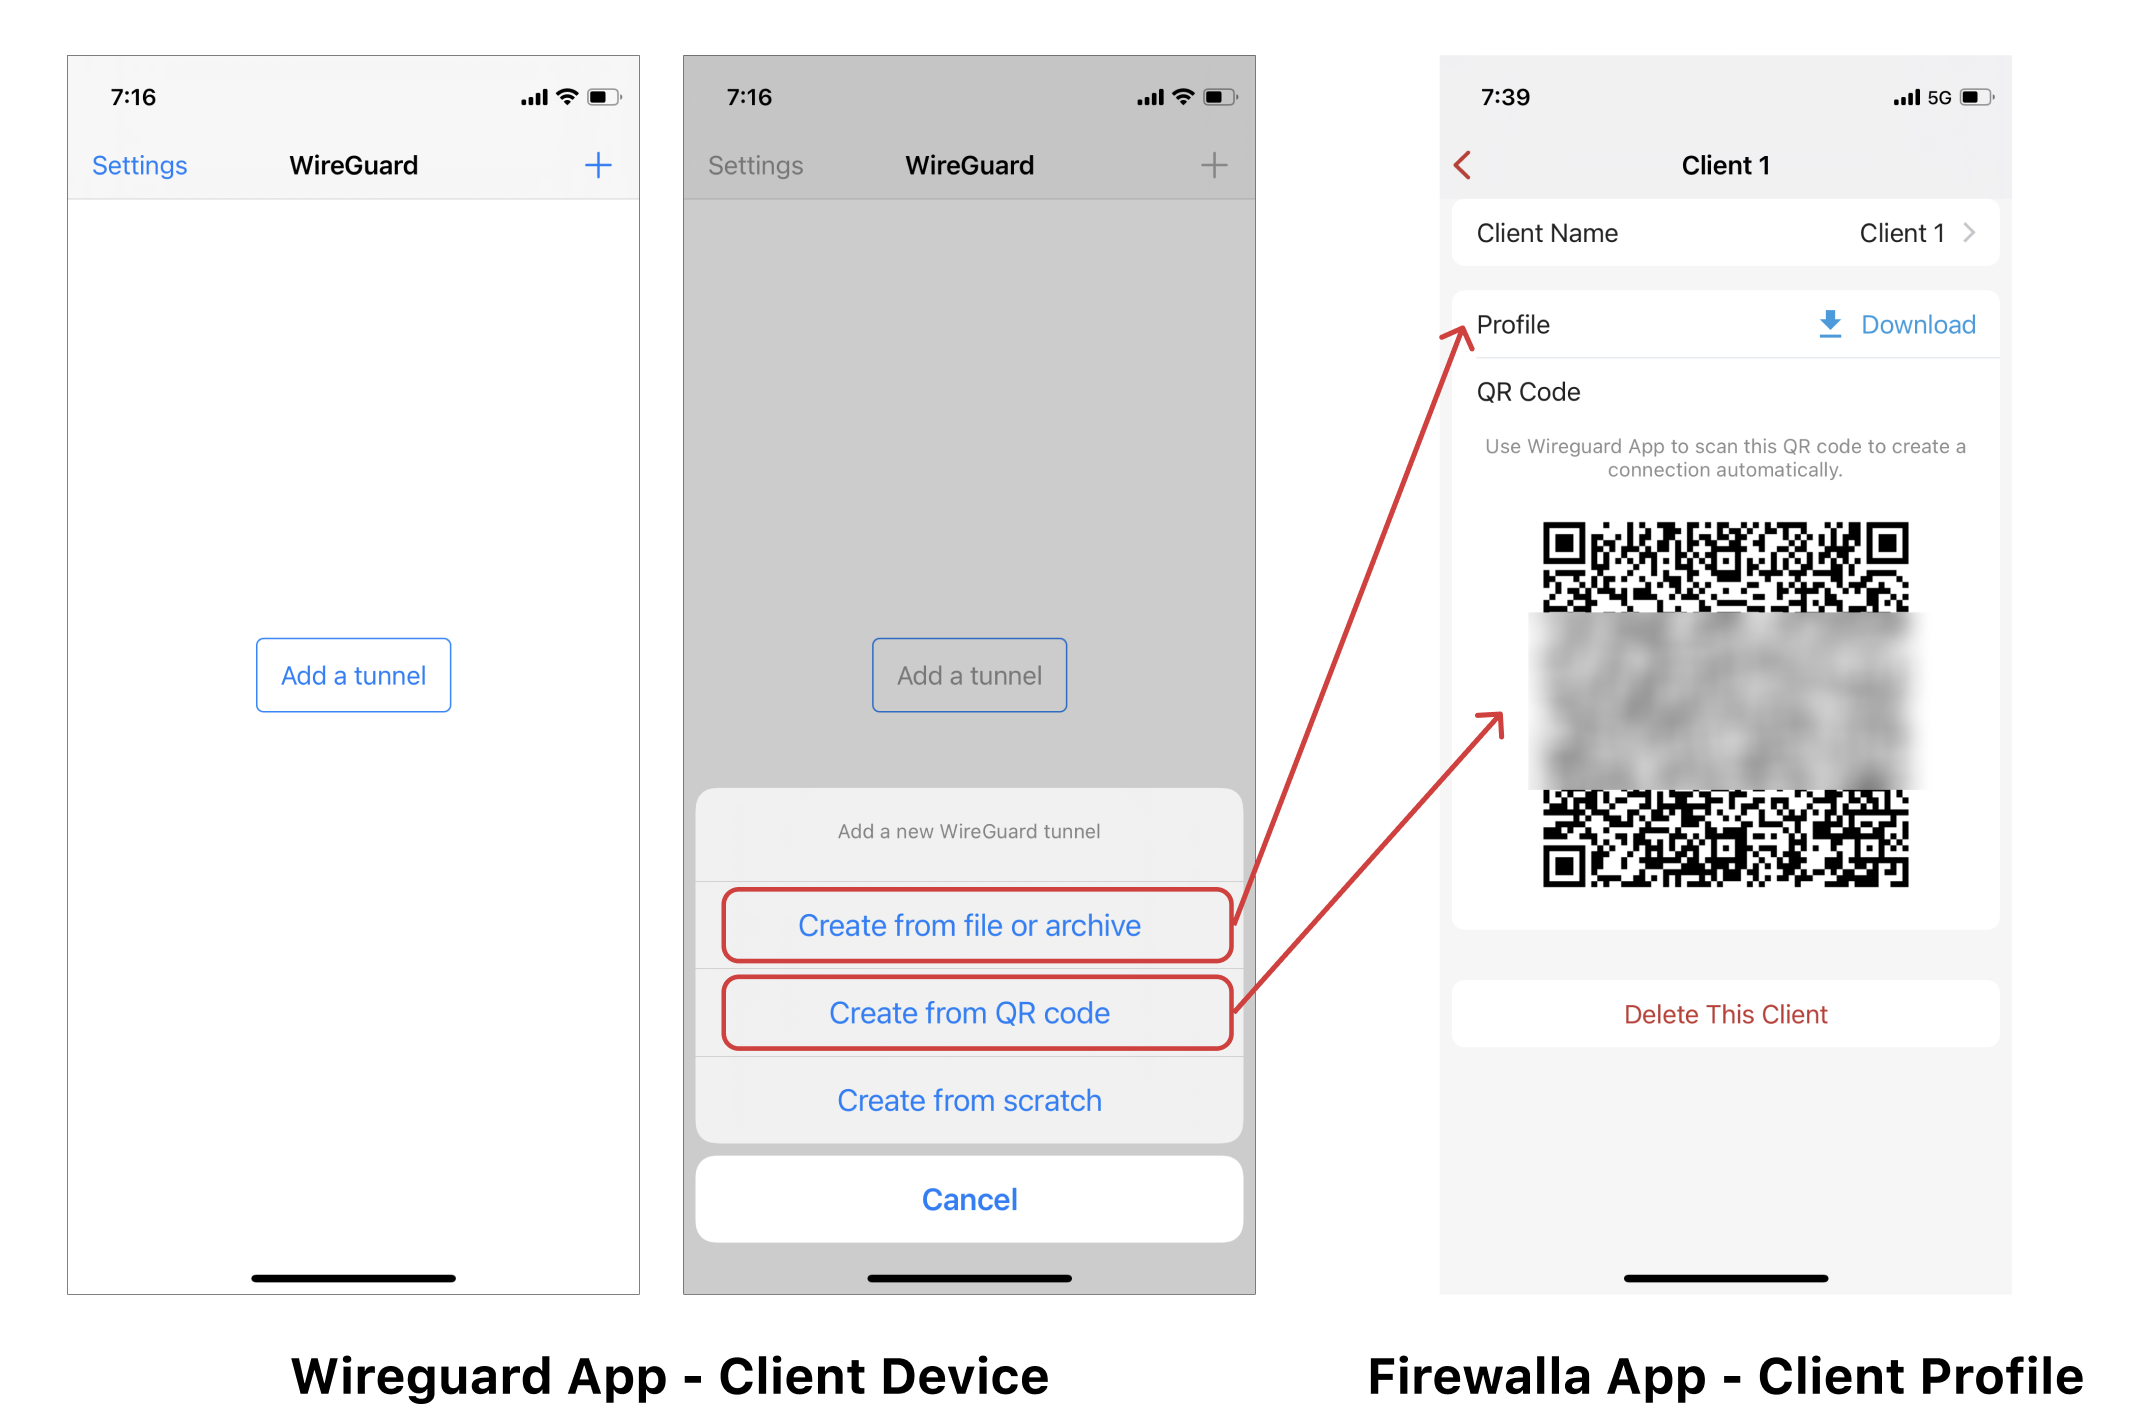  WireGuard VPN can be connected by creating from file or create from QR code from the Firewalla app. Example shown.